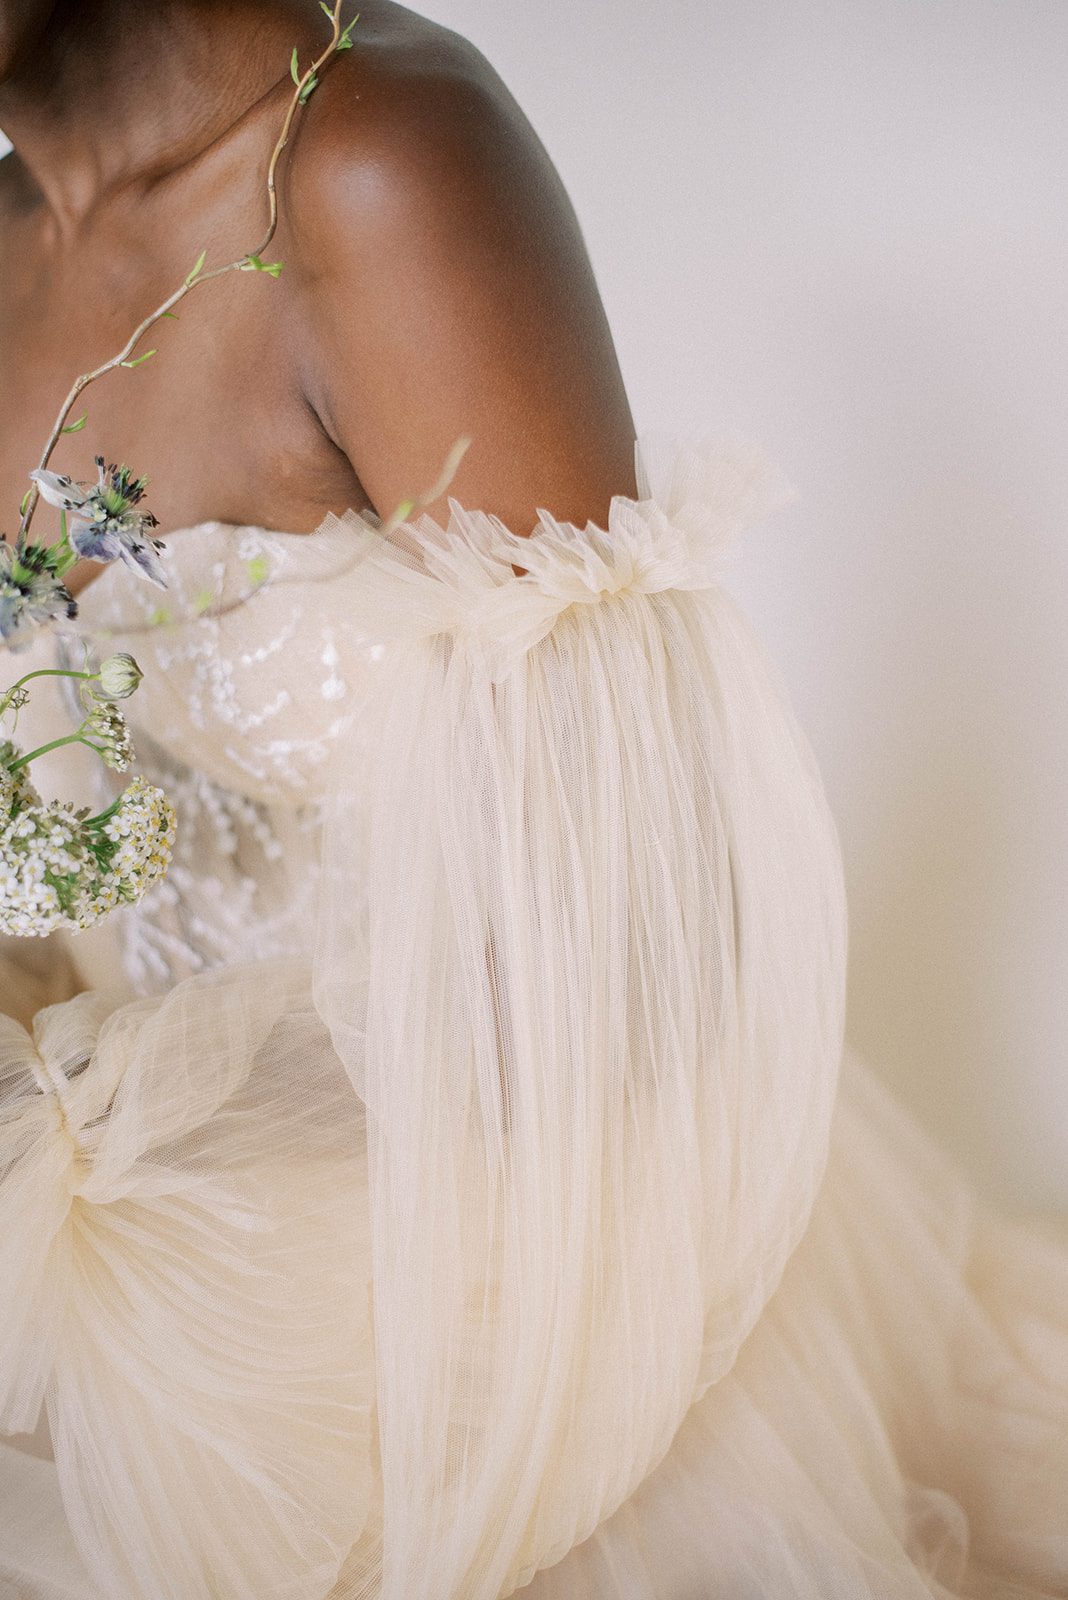 deatil shot of brides wedding dress with an off the shoulder sleeve in an off white gown